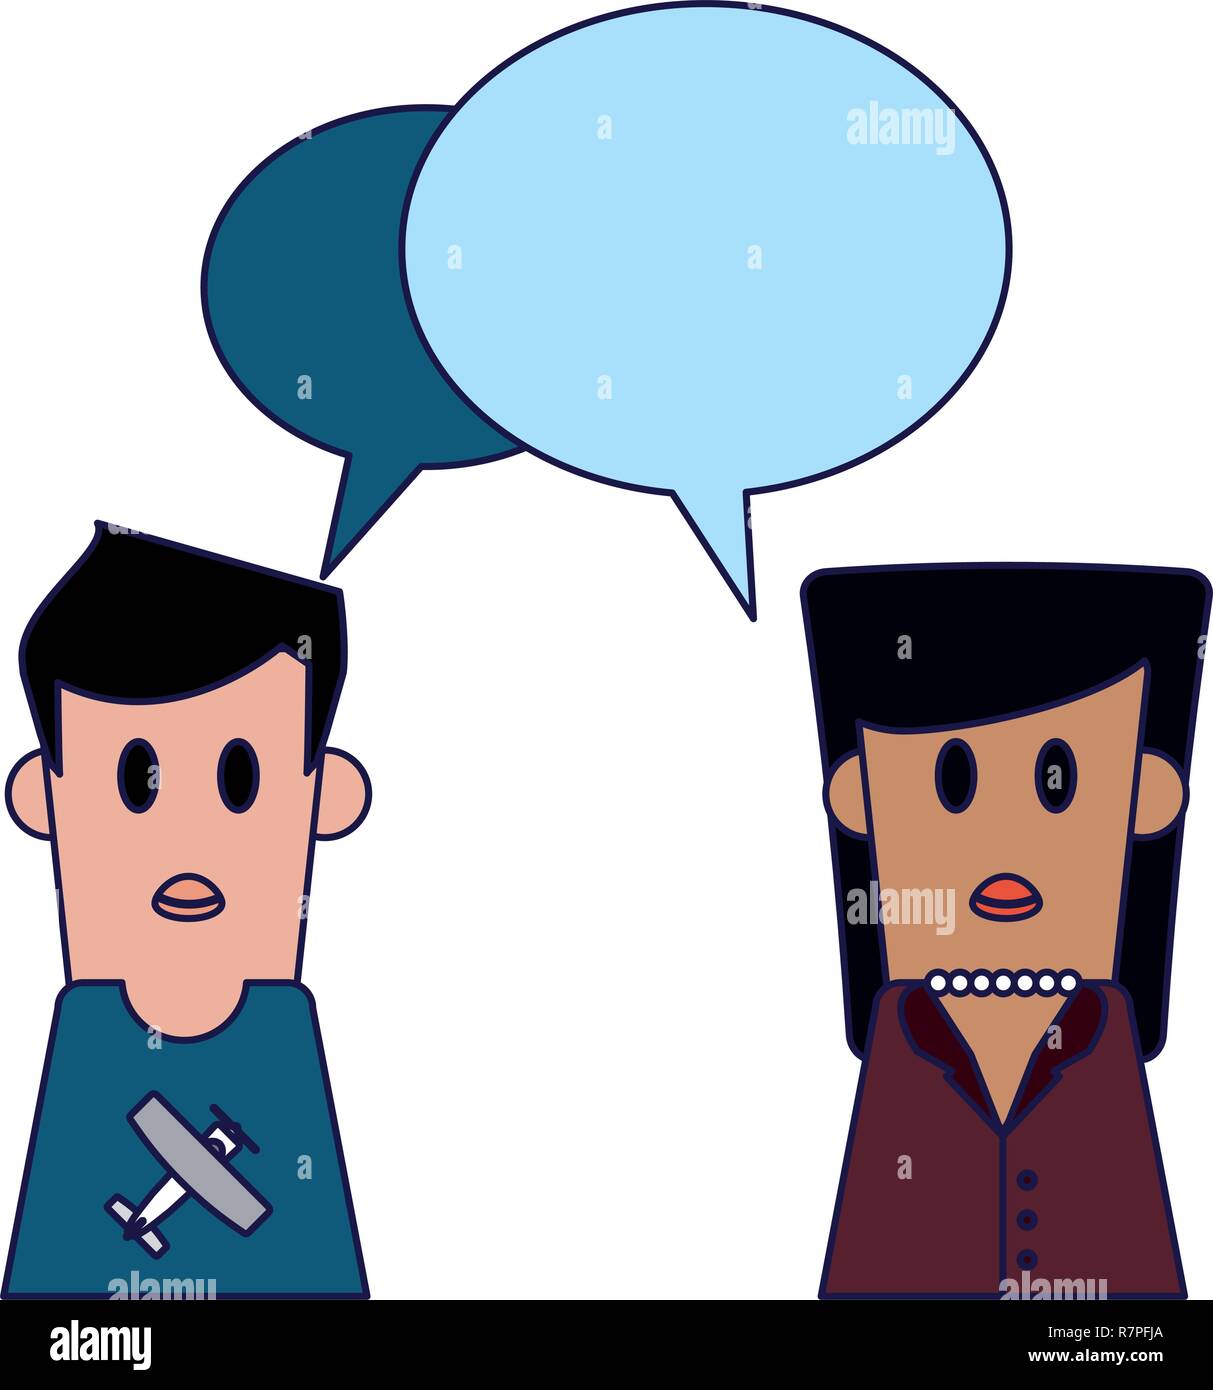 two animated people talking